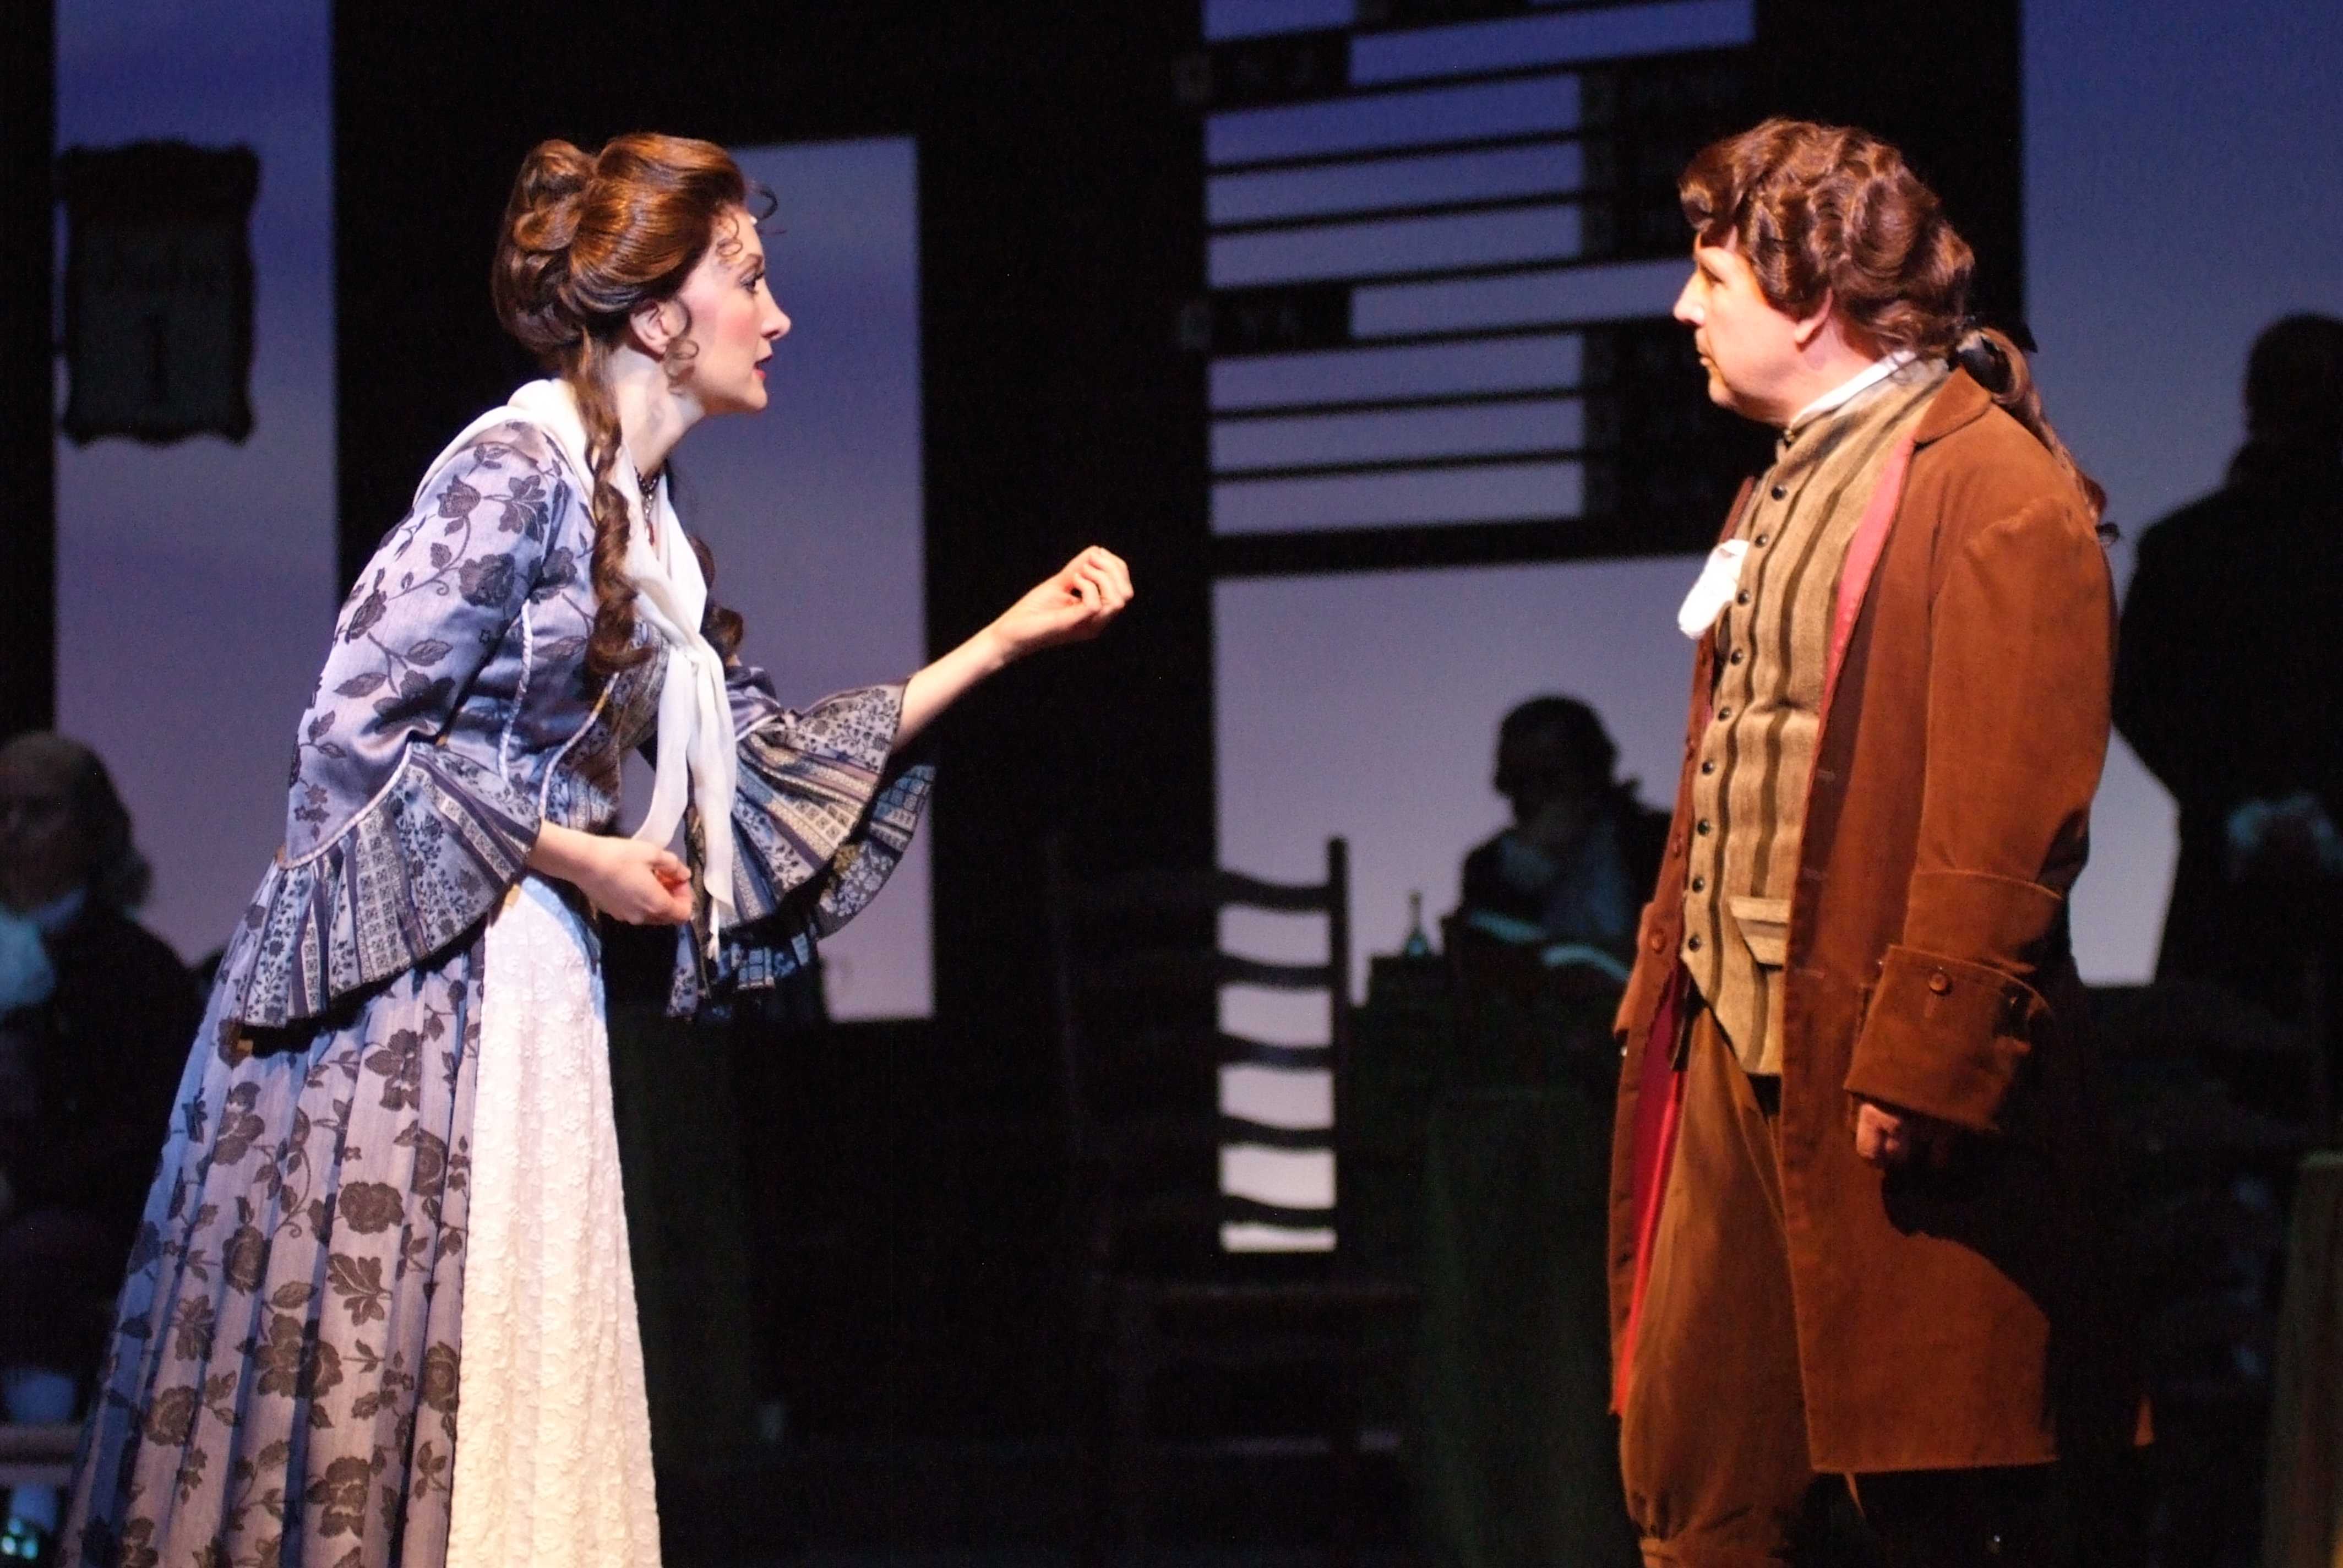 Abigail Adams, played by Christanna Rowader and John Adams, played by Peter Husmann in the historical musical 1776